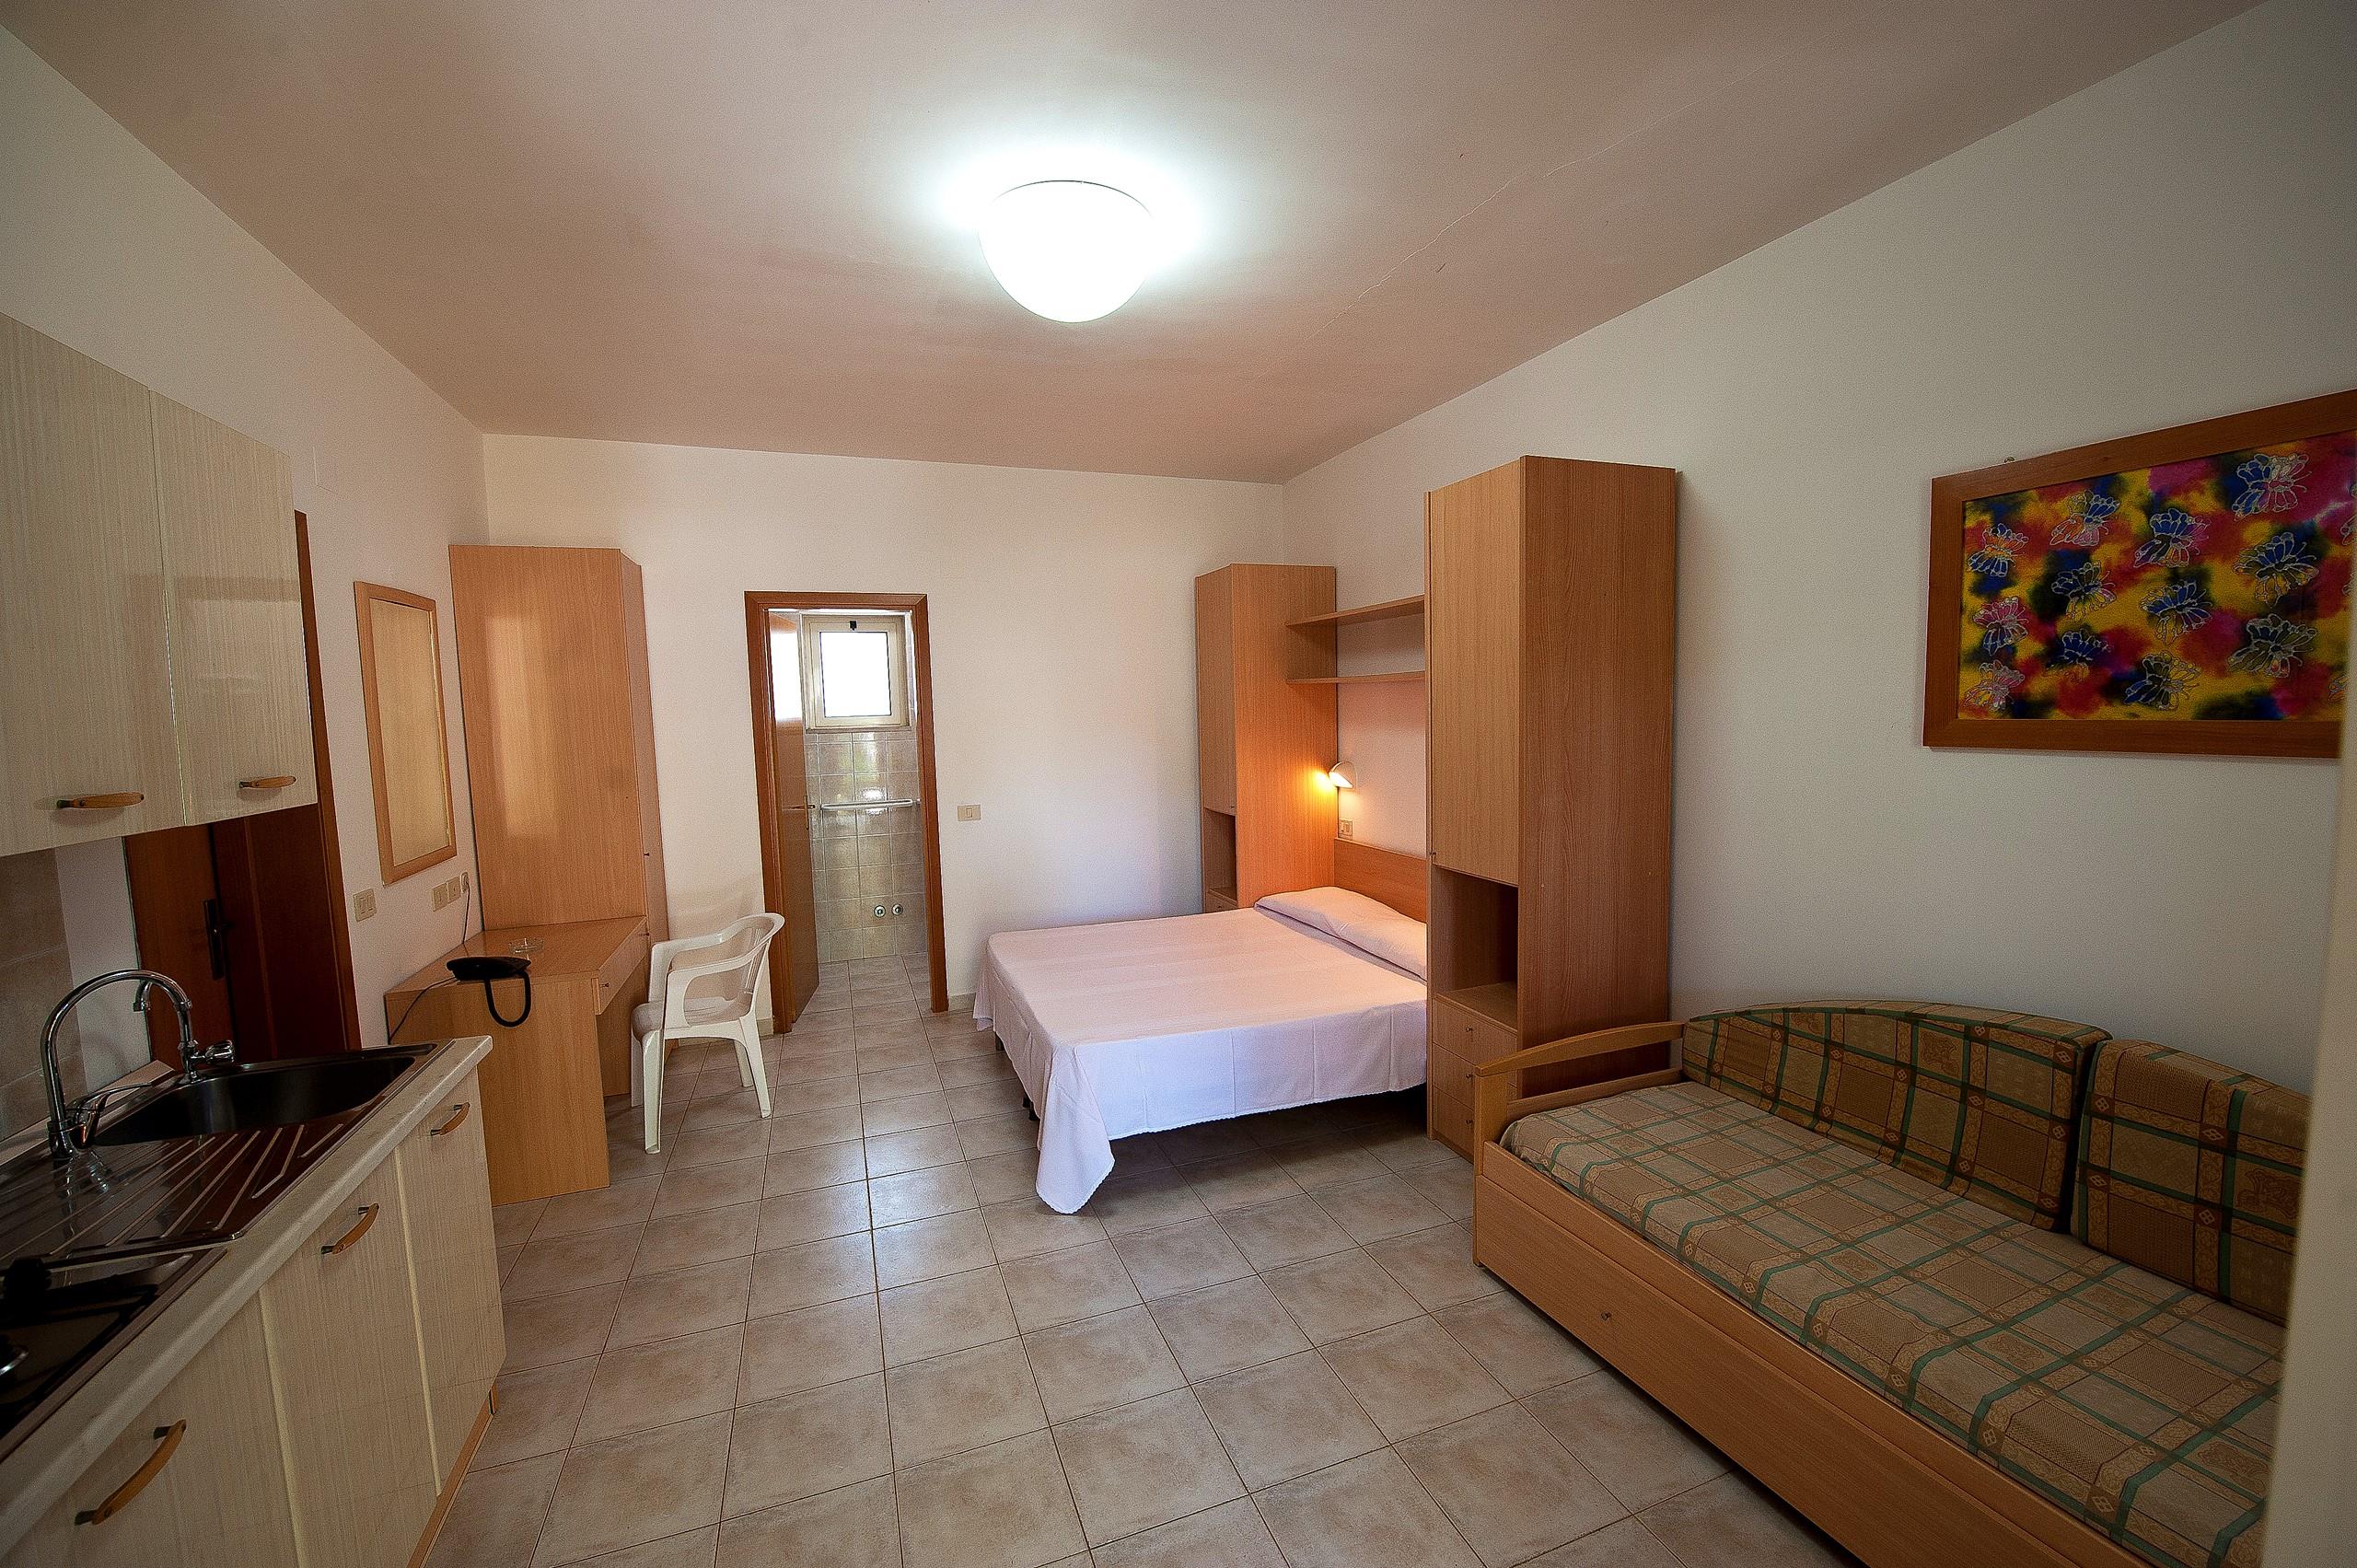 Accommodation - Bungalow 'Giada' One-Room - Camping Village Le Diomedee